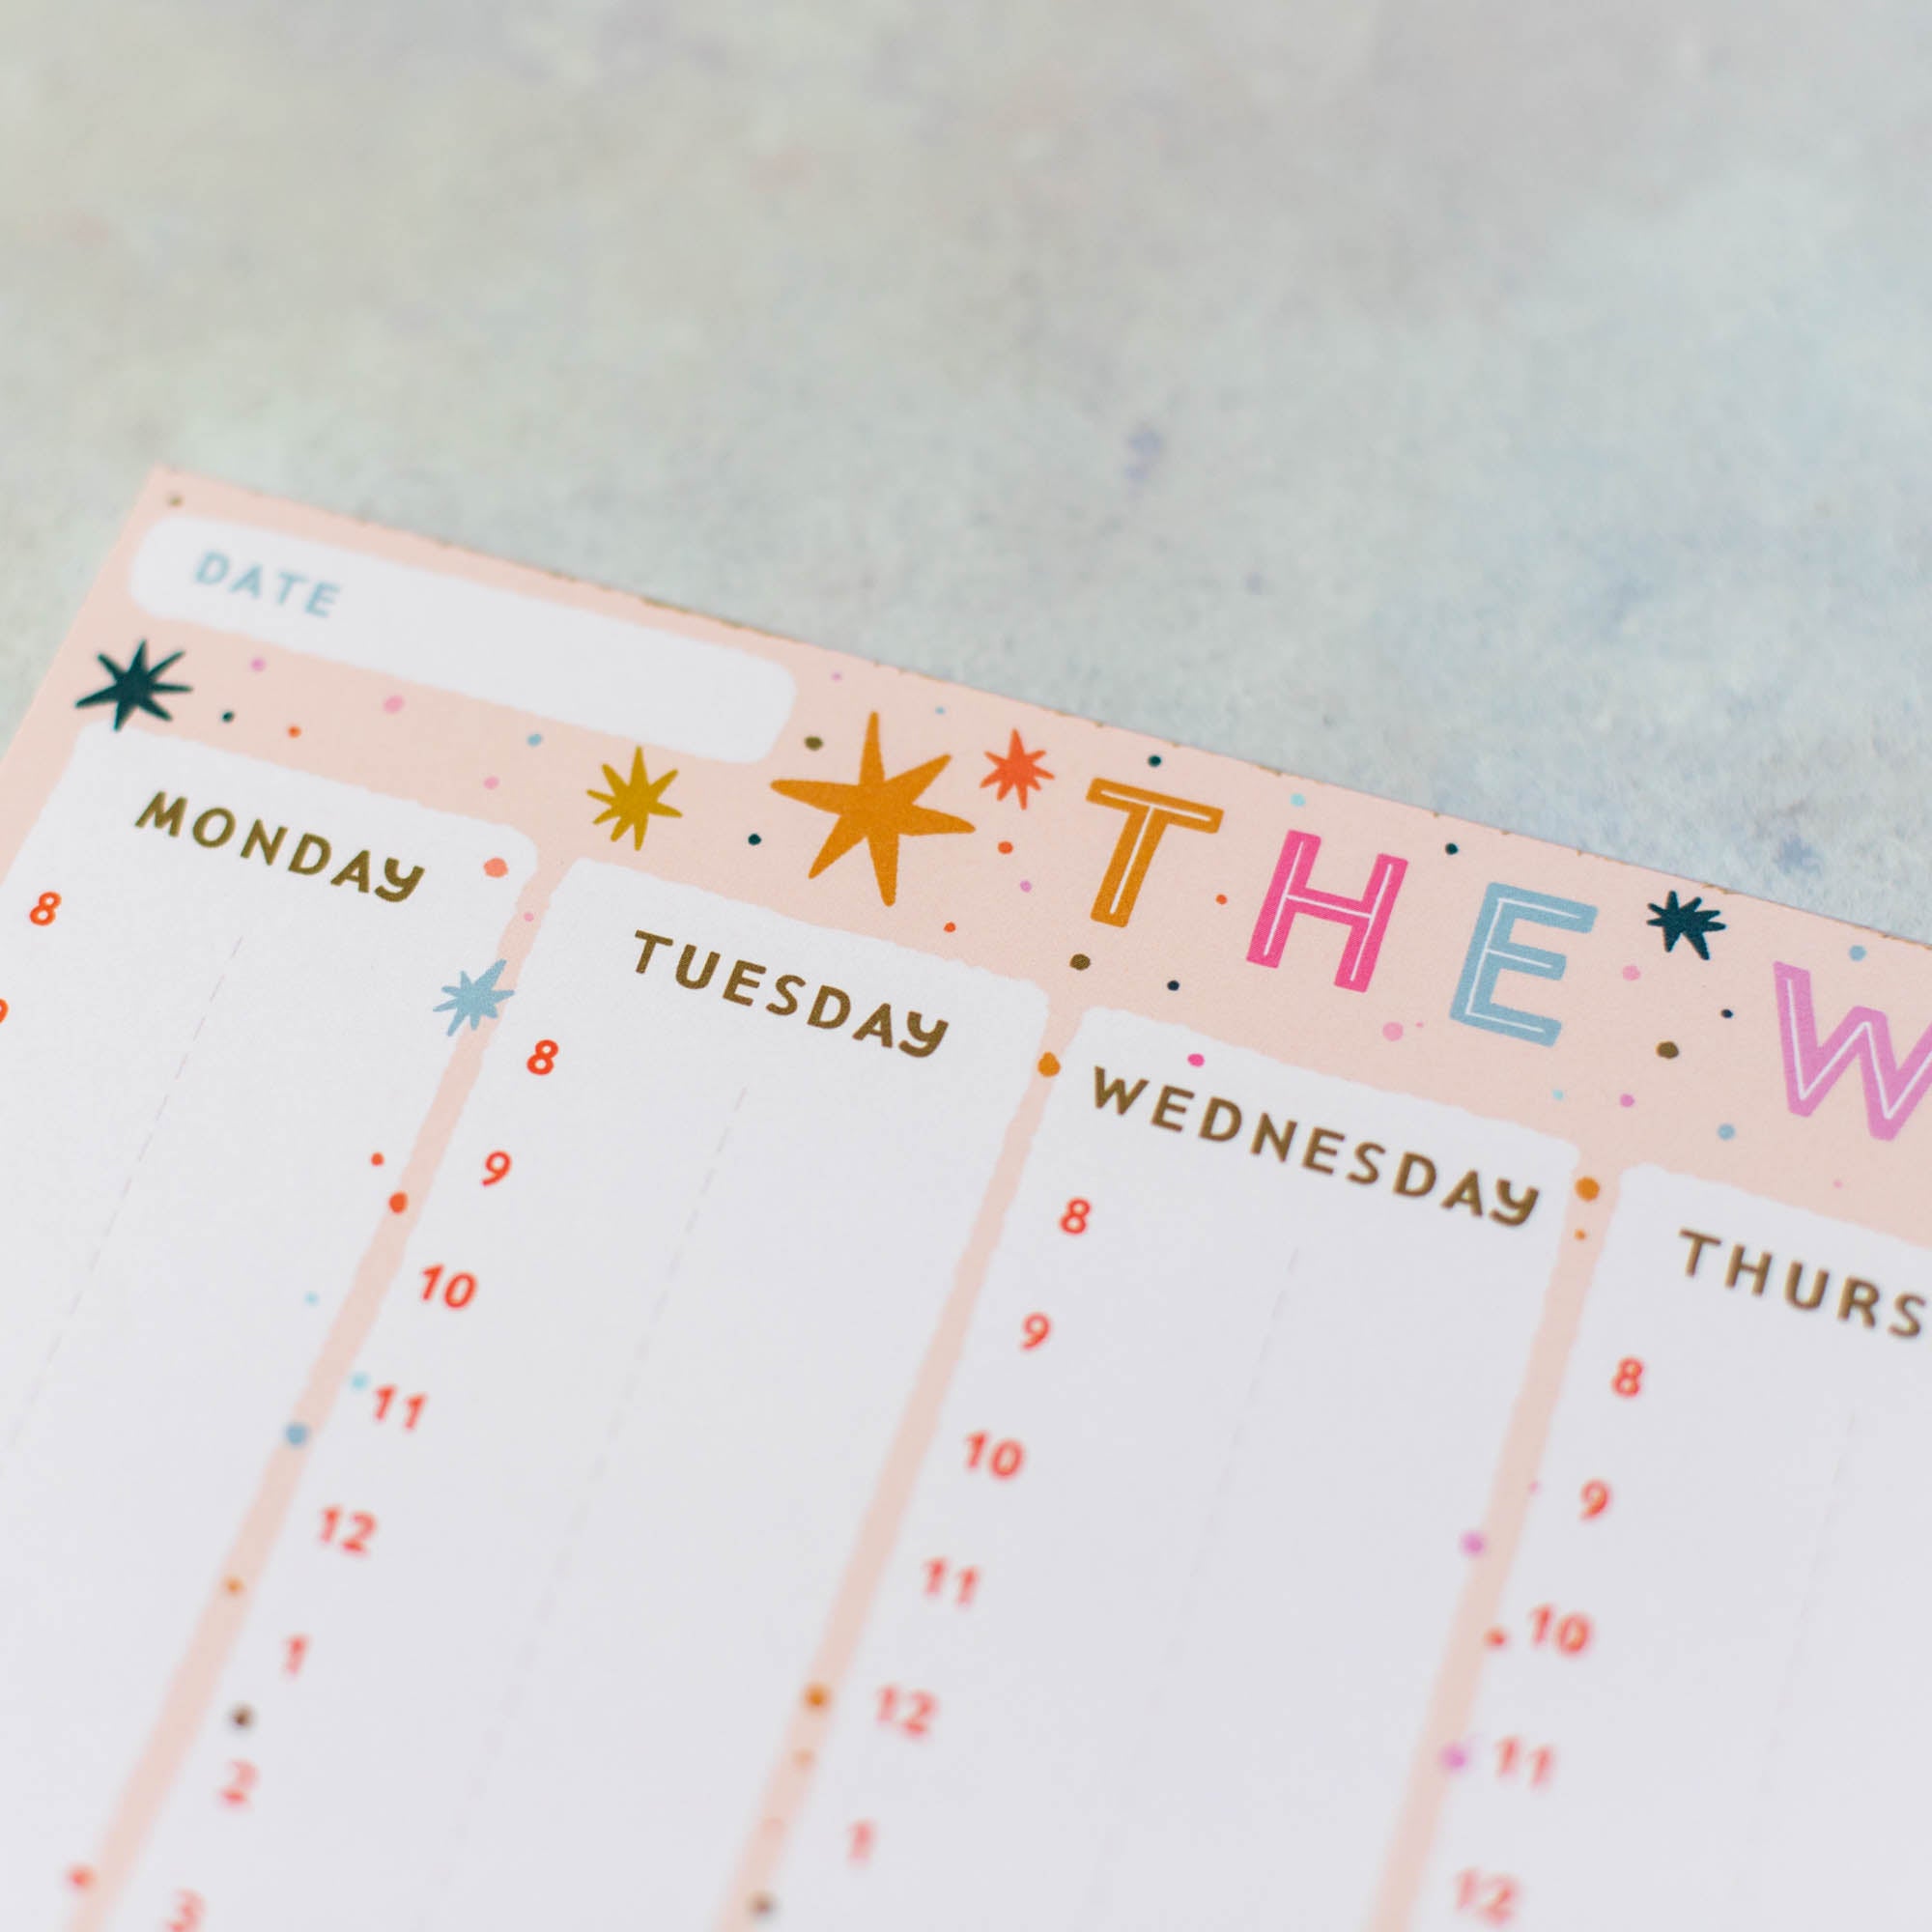 The Week A4 Planner Pad - Finest Imaginary